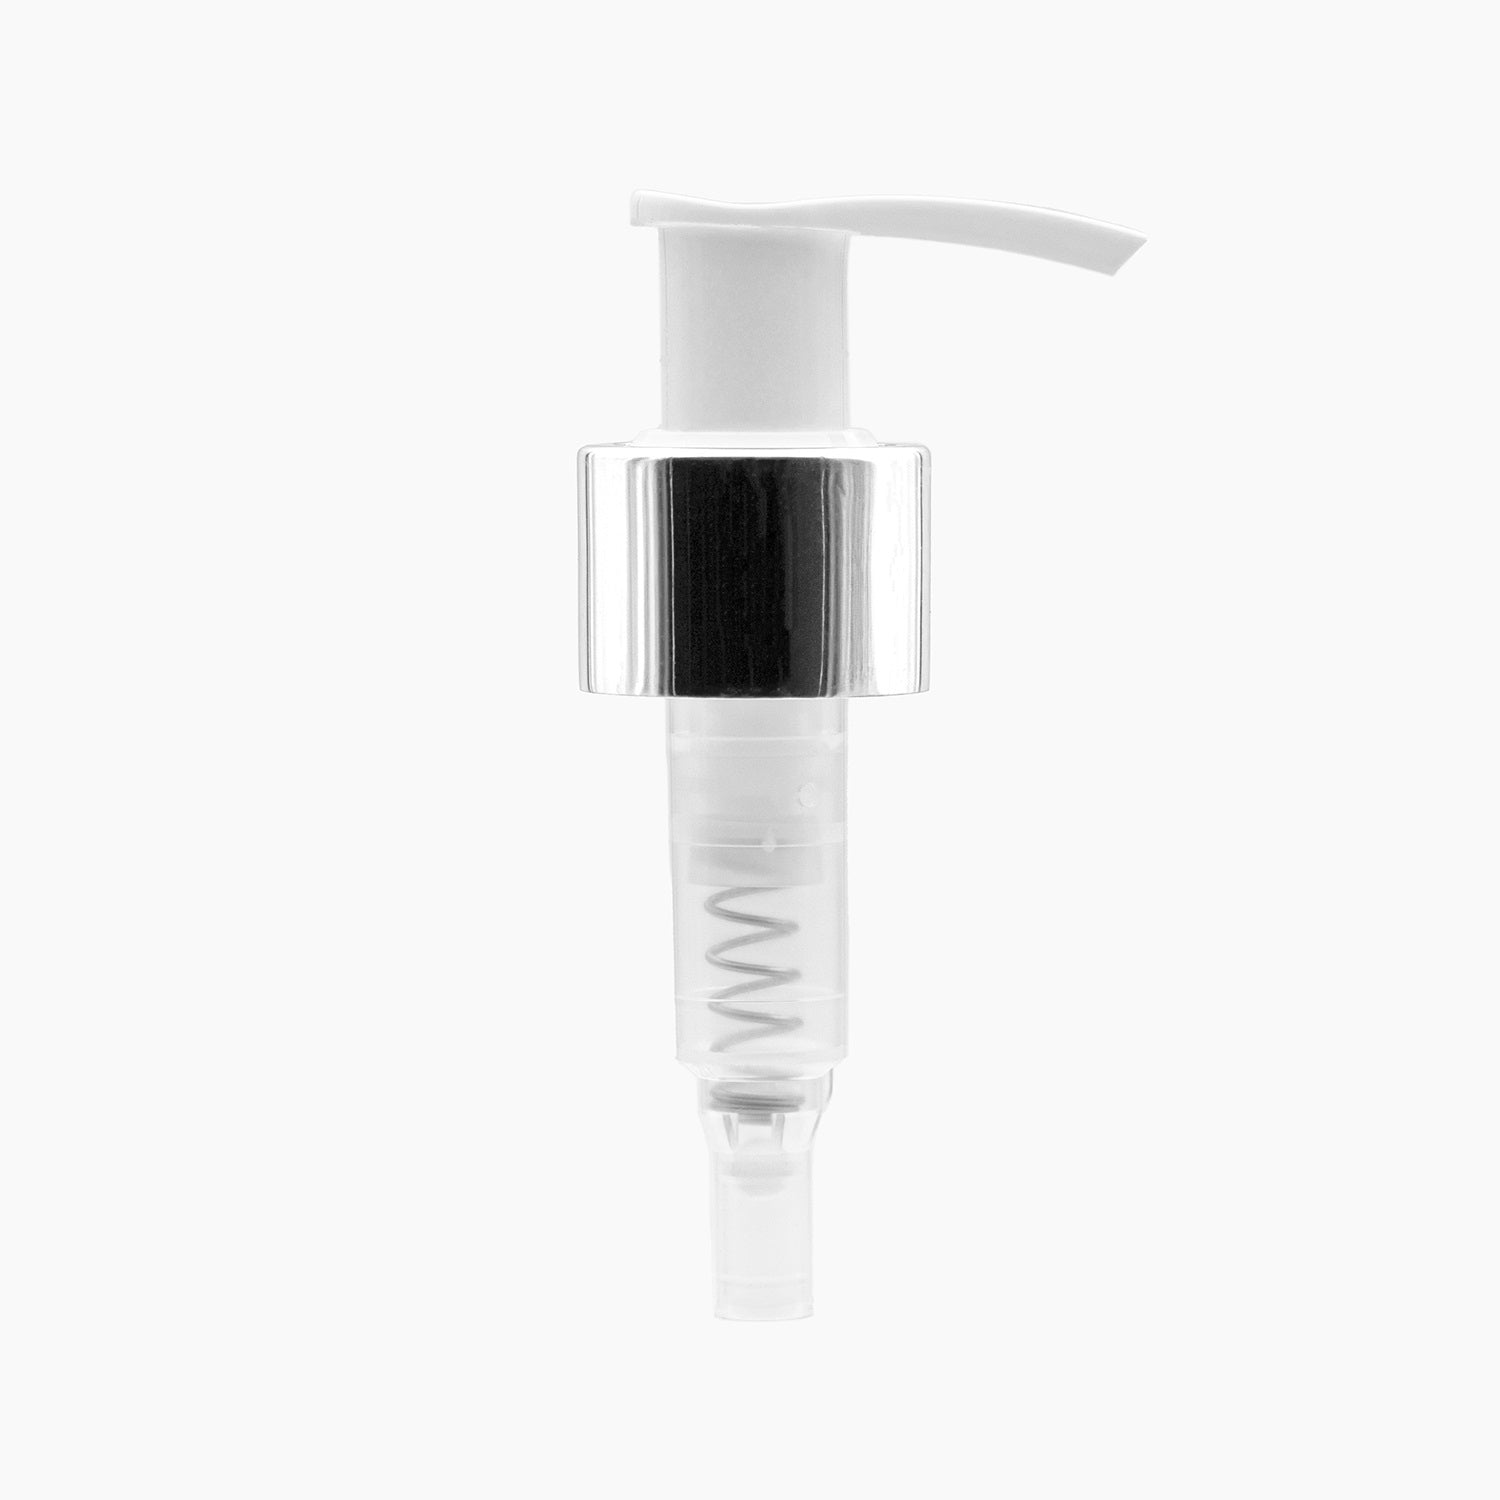 Silver Collar White 24mm Plastic Lotion Pump Cap On White Background | Brightpack Closures And Accessories